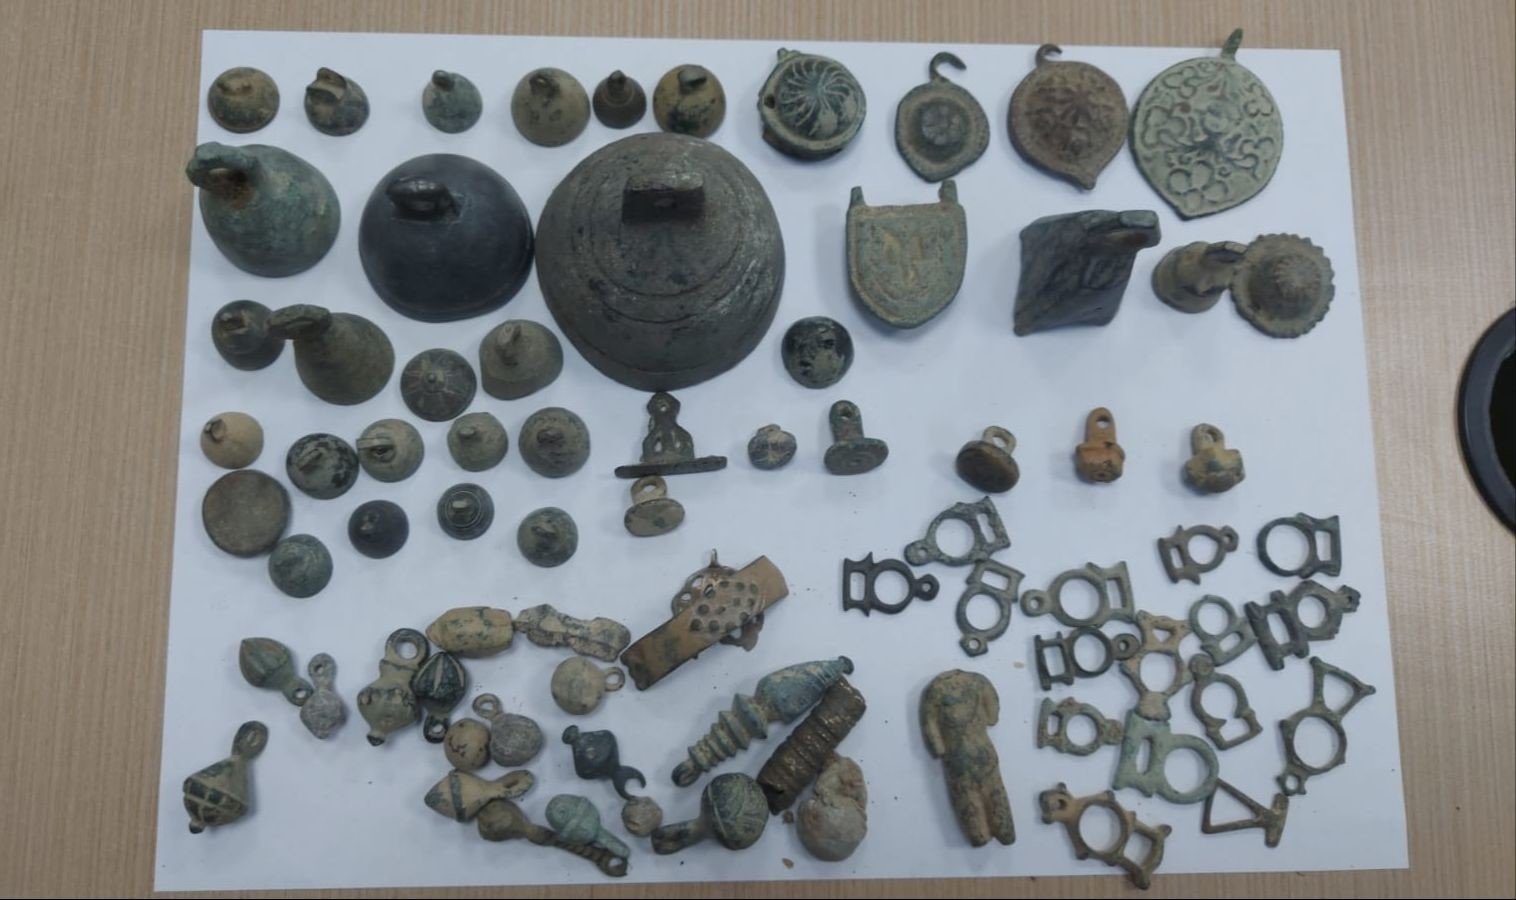 Artifacts, including 64 objects, 20 coins, 7 seals, 1 statue and other objects, were seized in Izmir, March 1, 2023. (IHA Photo)